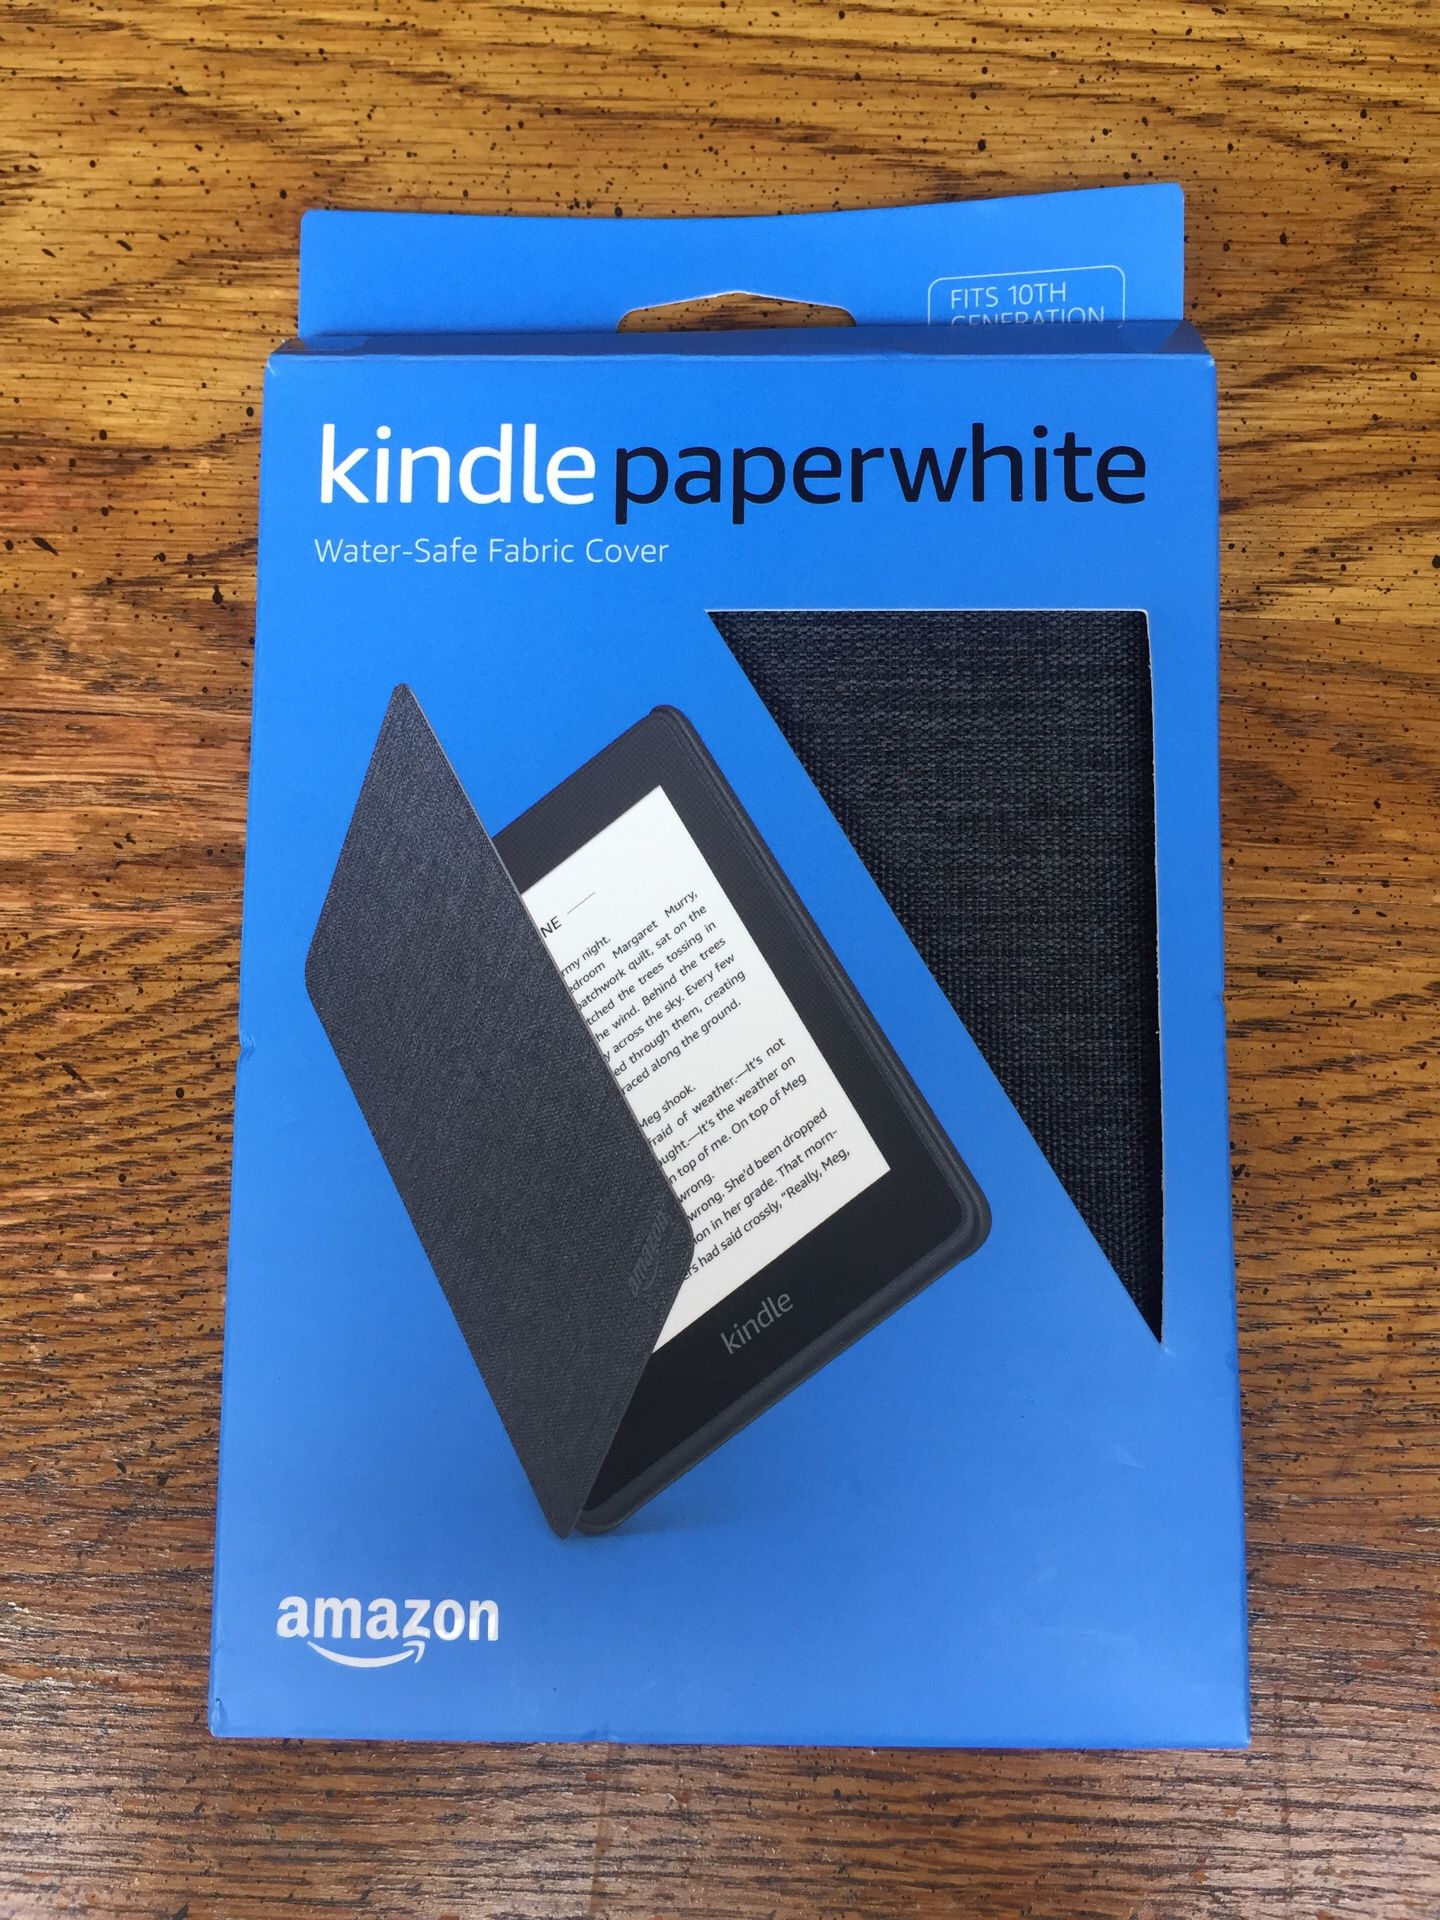 Kindle paperwhite - water safe fabric cover - Fits 10th generation